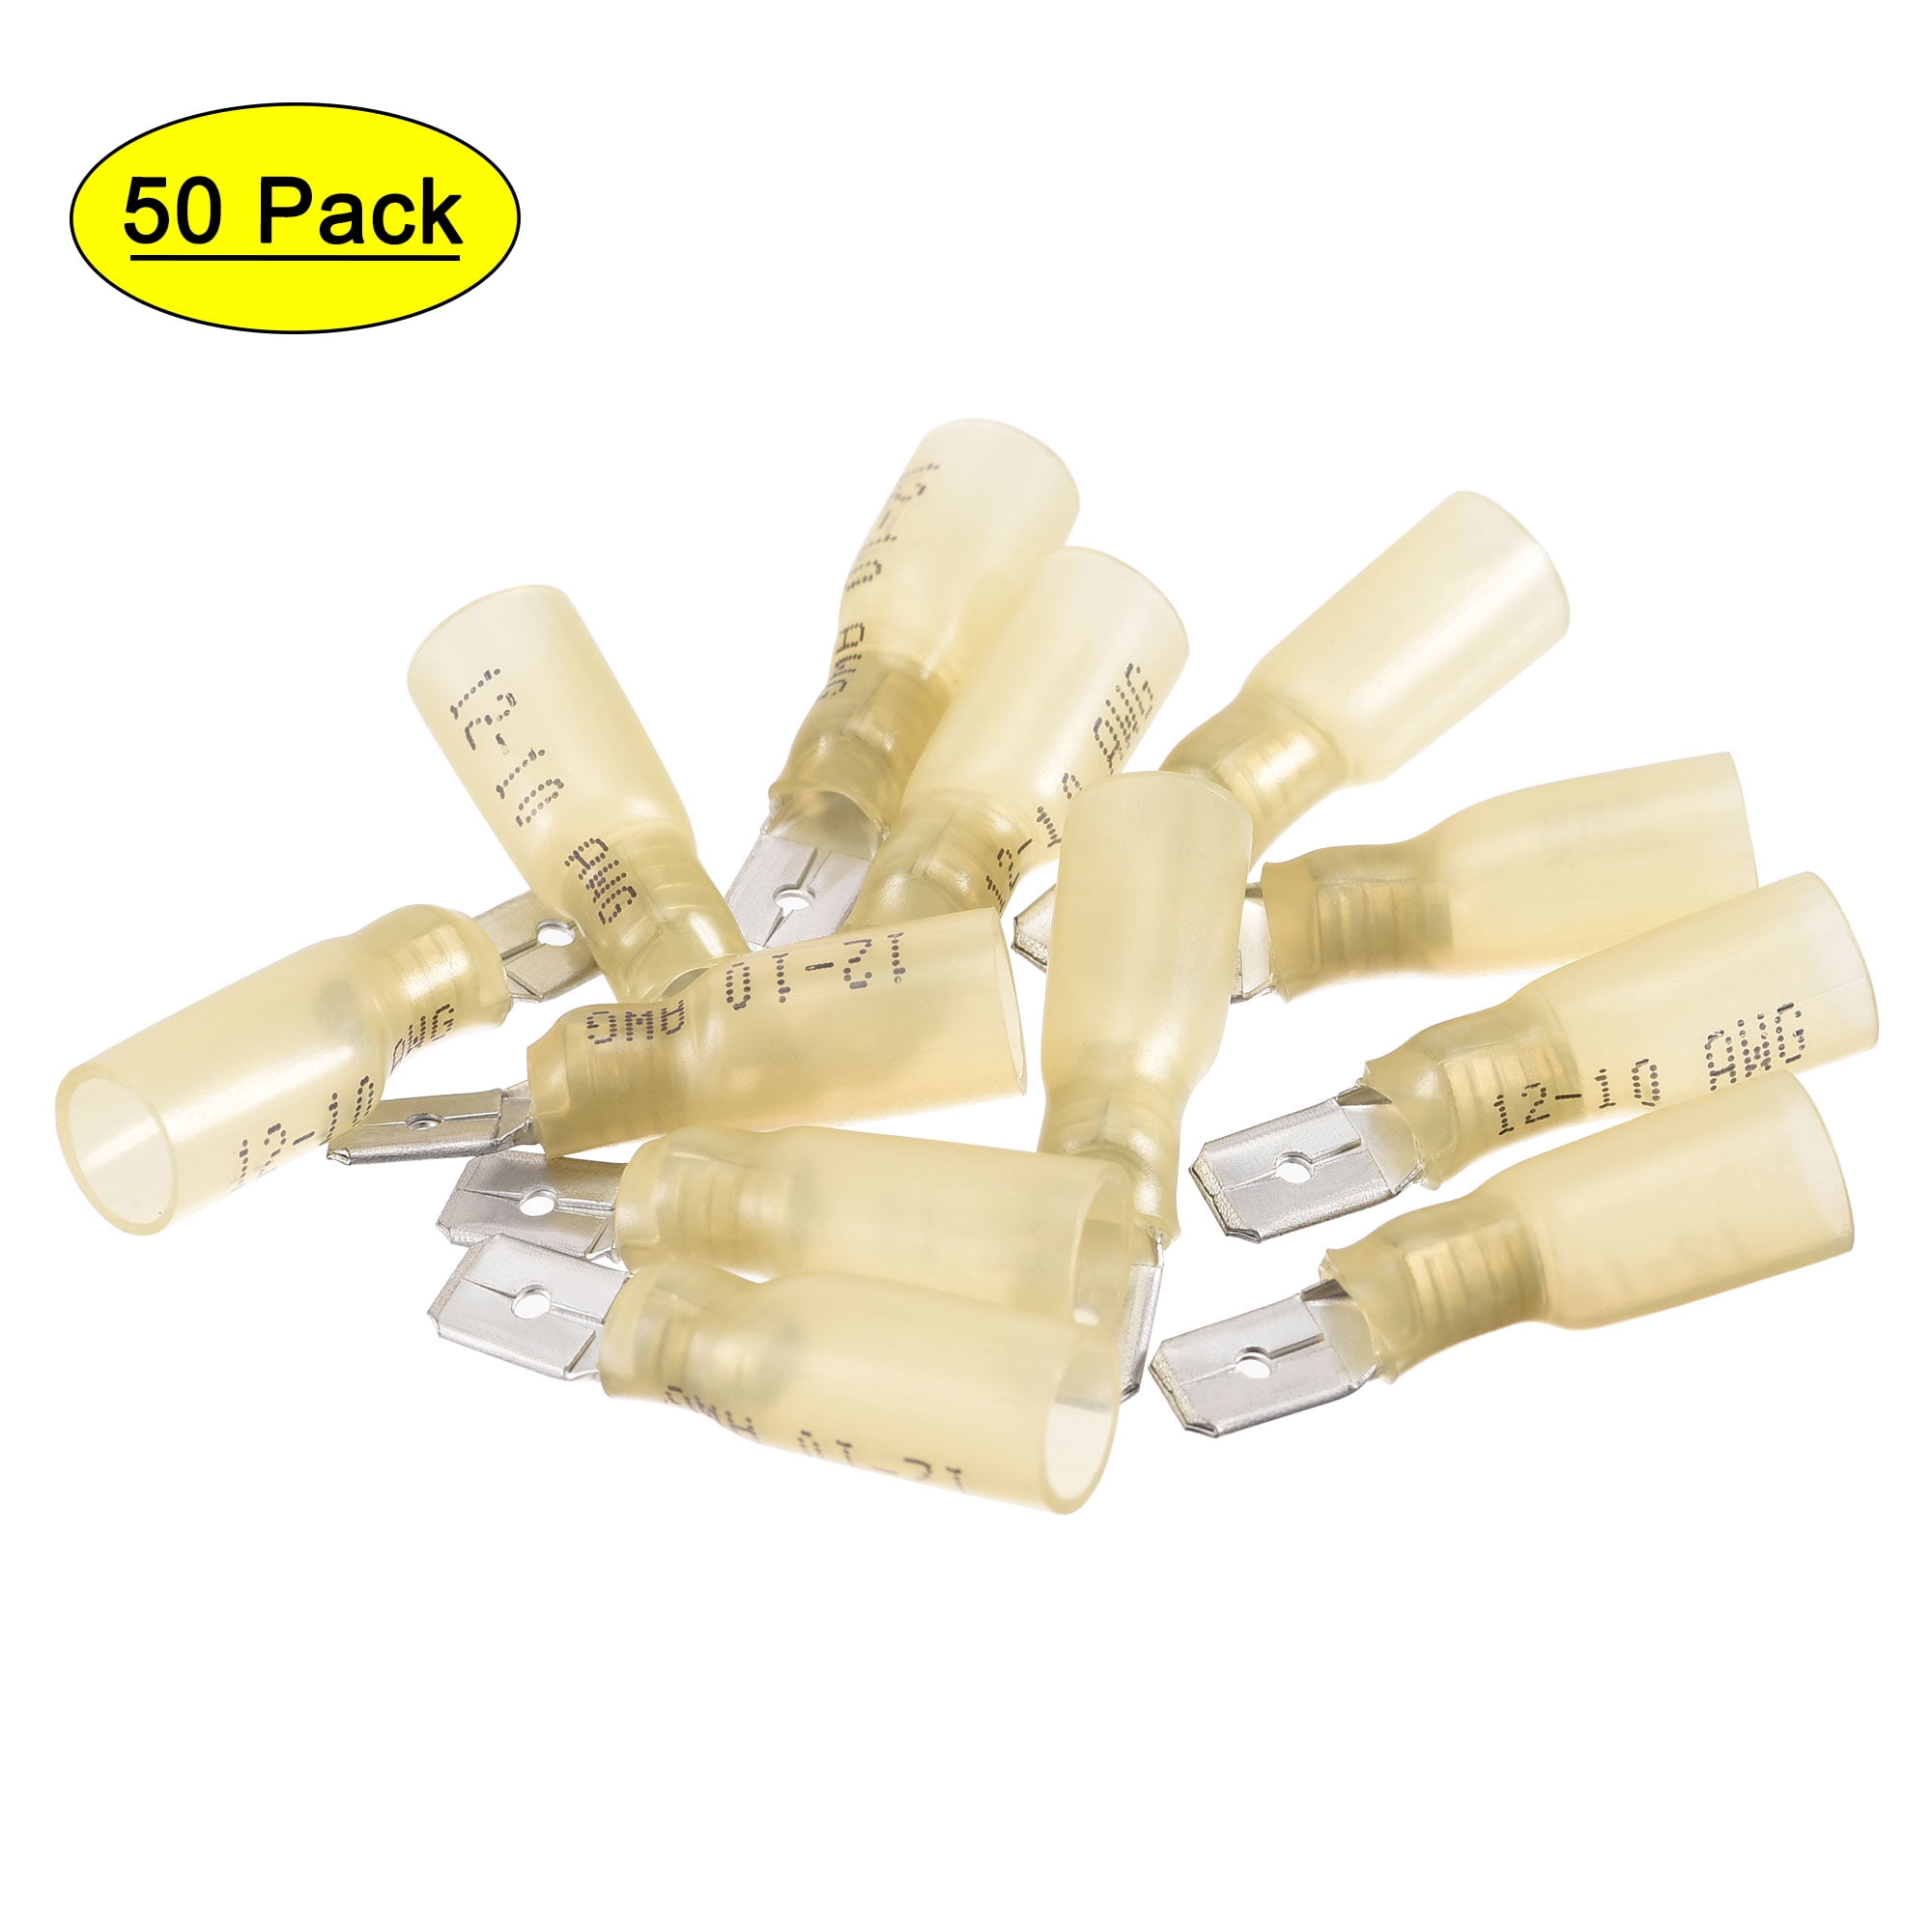 HEAT RESISTANT FORK TERMINAL CRIMP 5MM PACK OF 10 ELECTRICAL WIRE CONNECTORS 